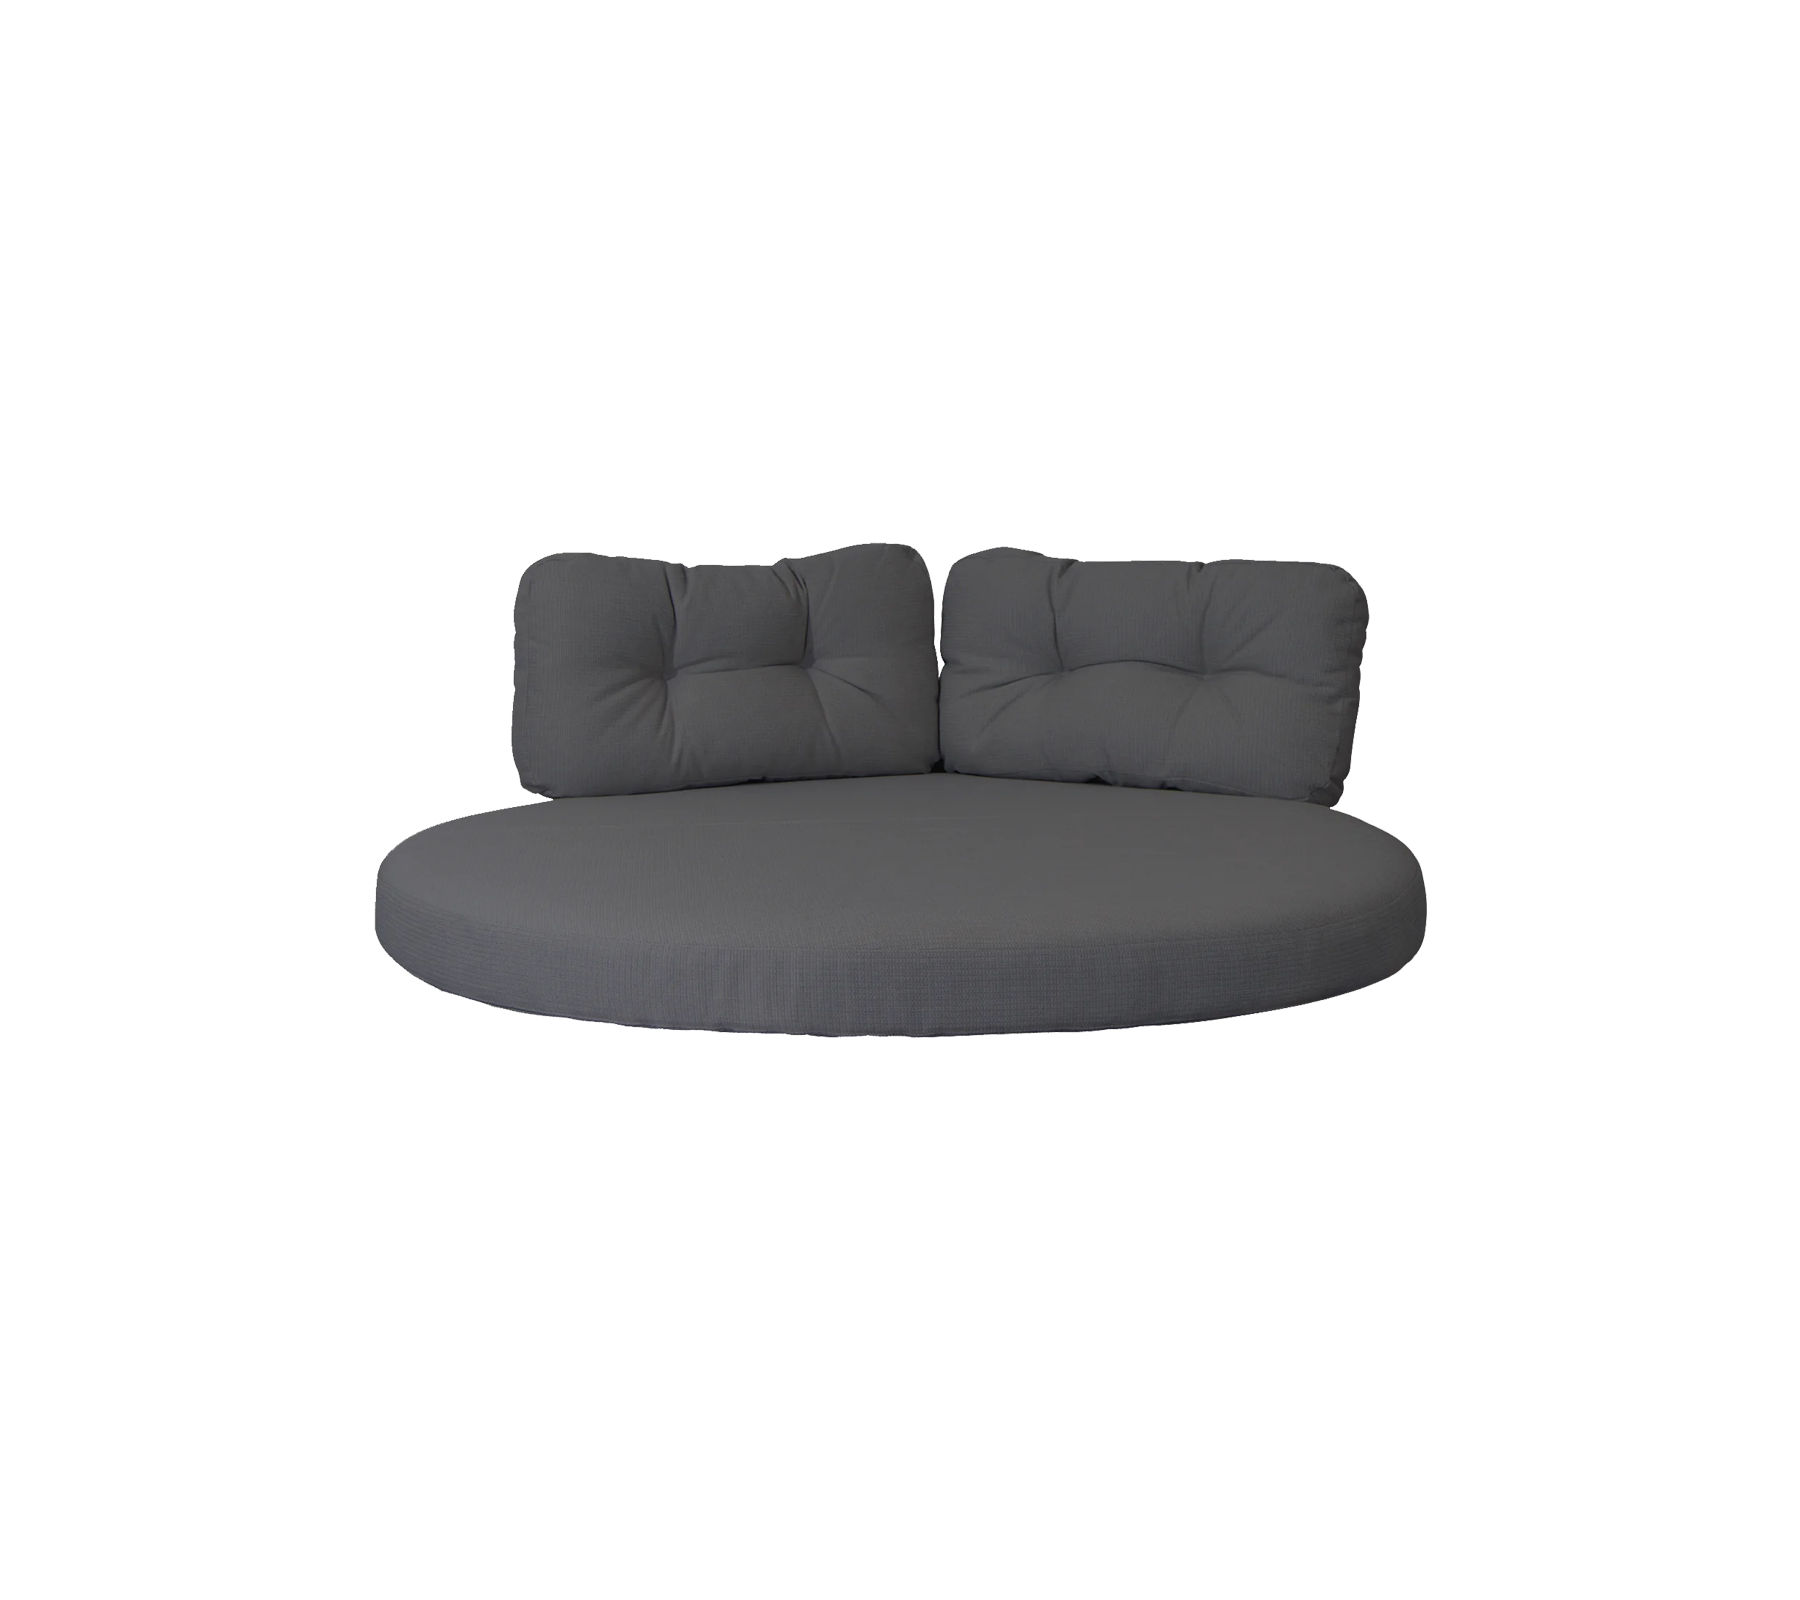 Cushion set, Ocean large daybed